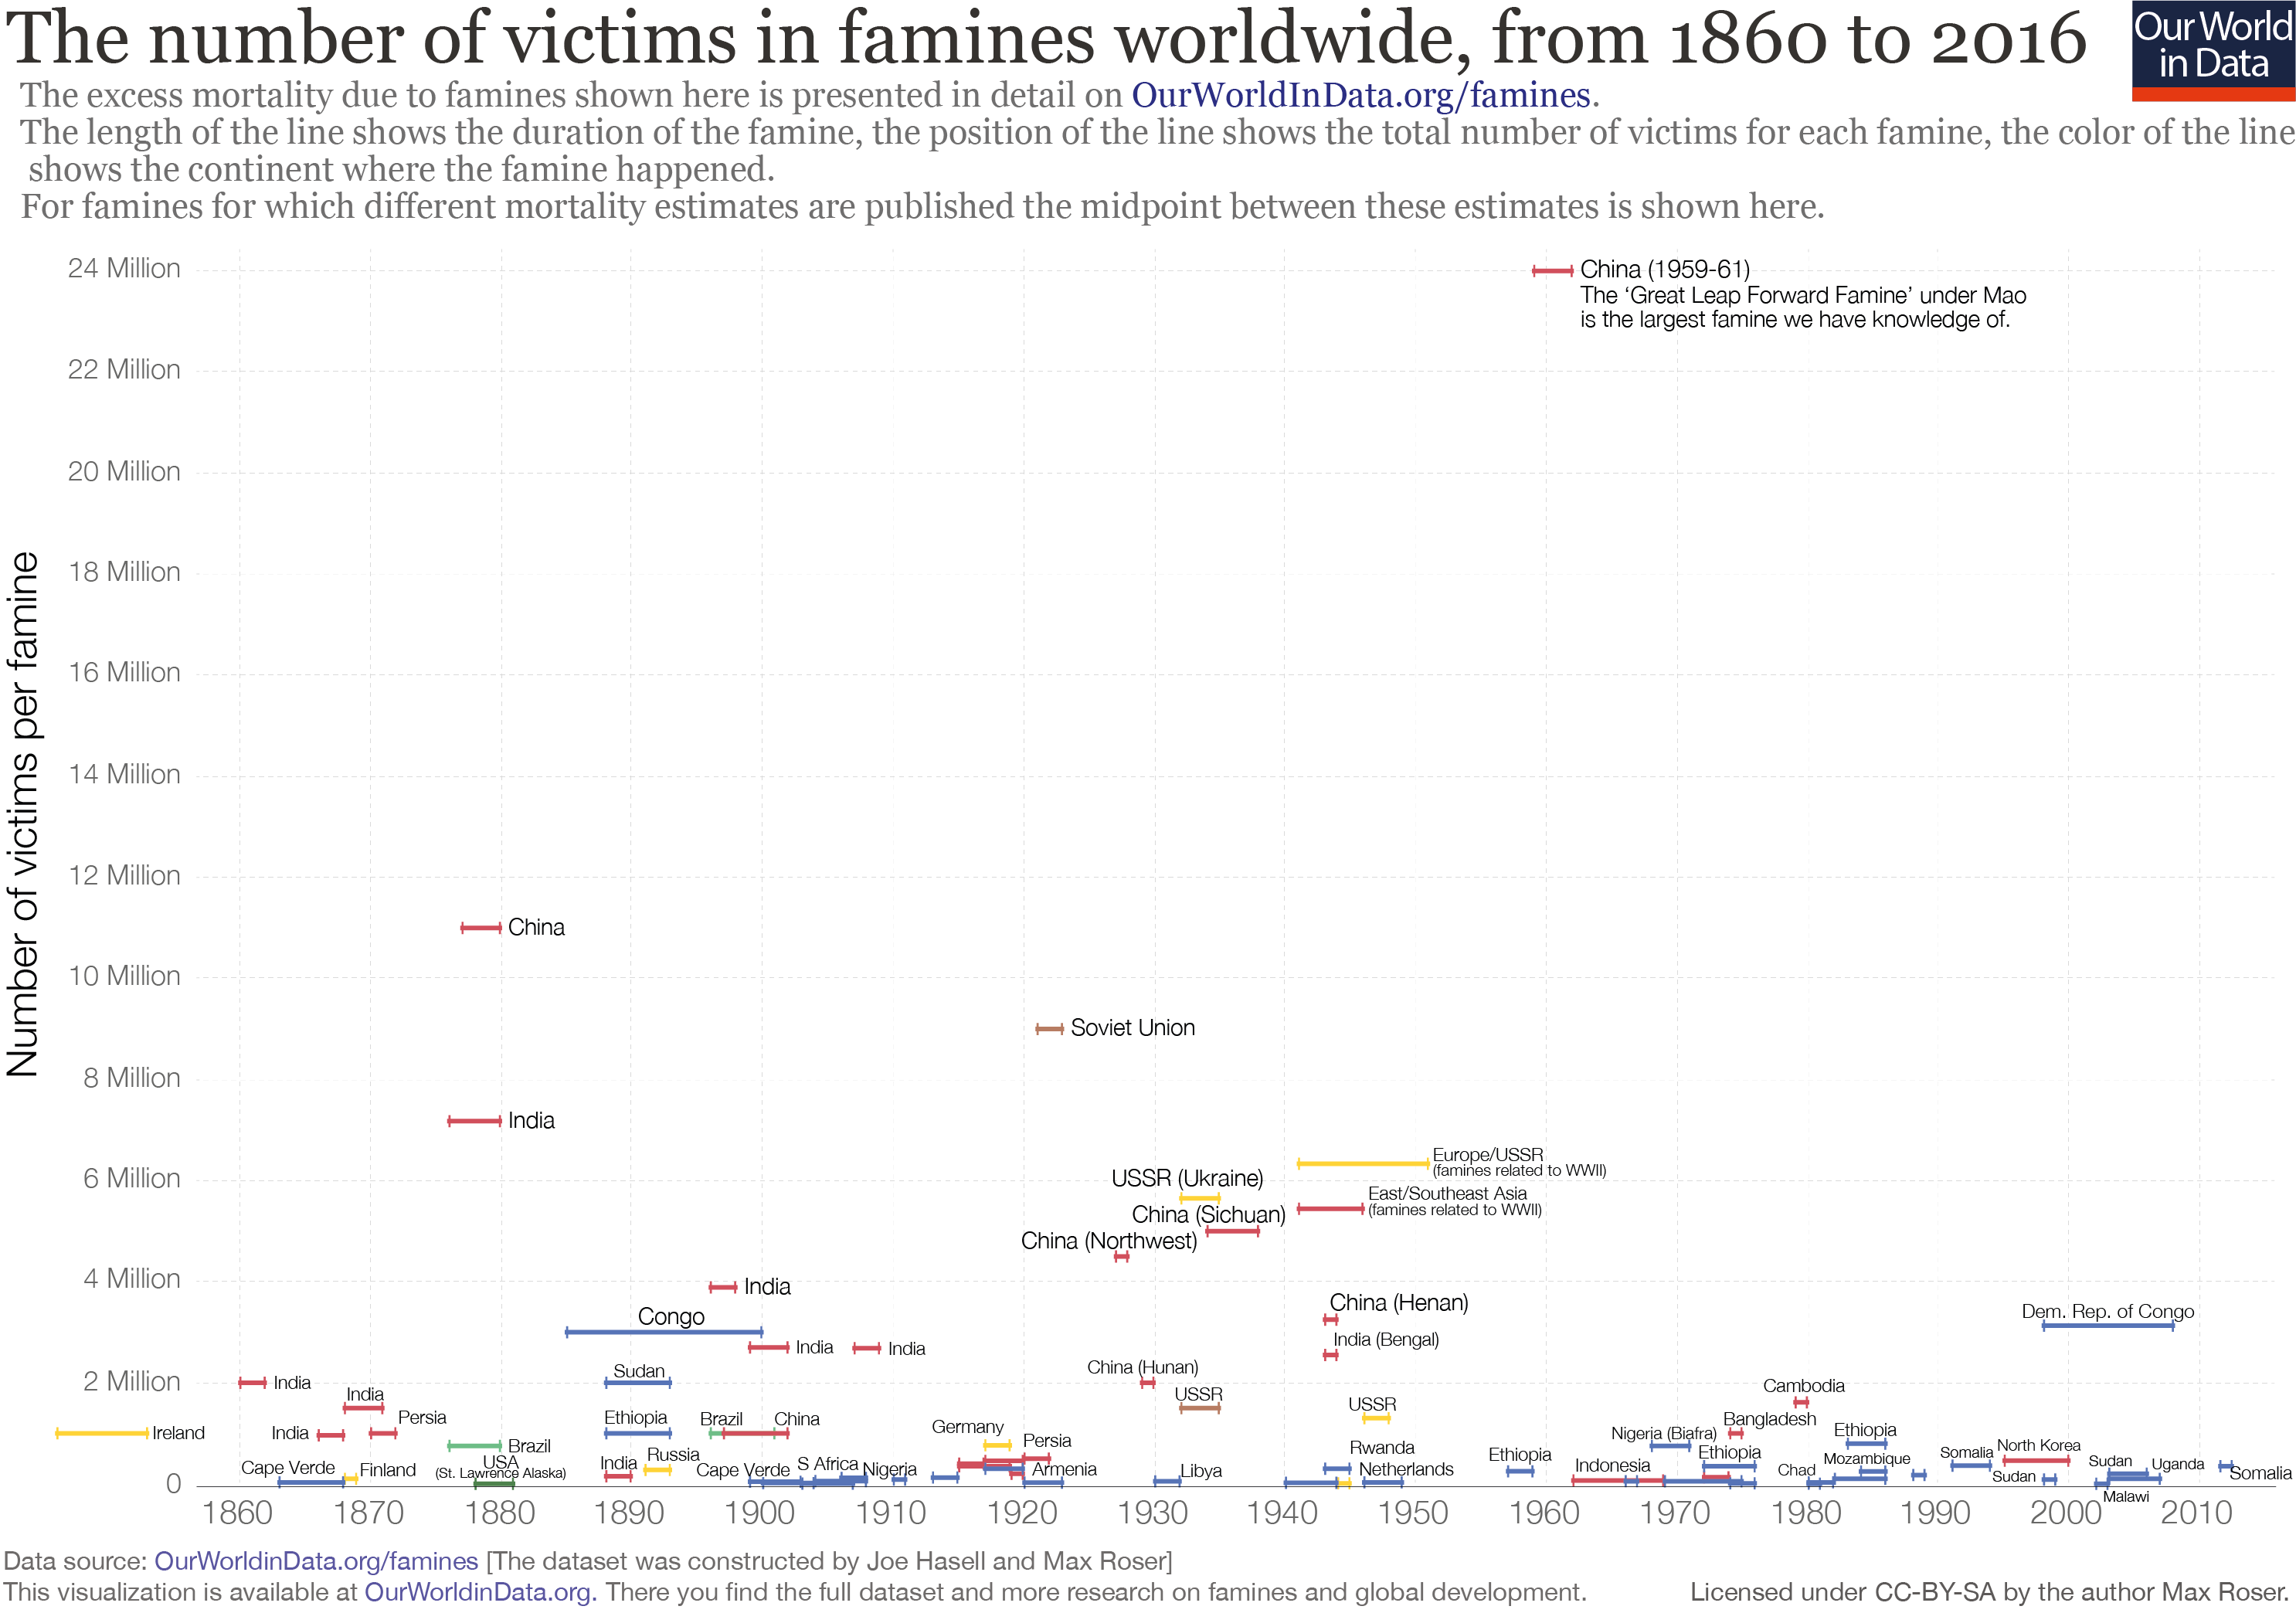 The number of famine victimes for each famine revised